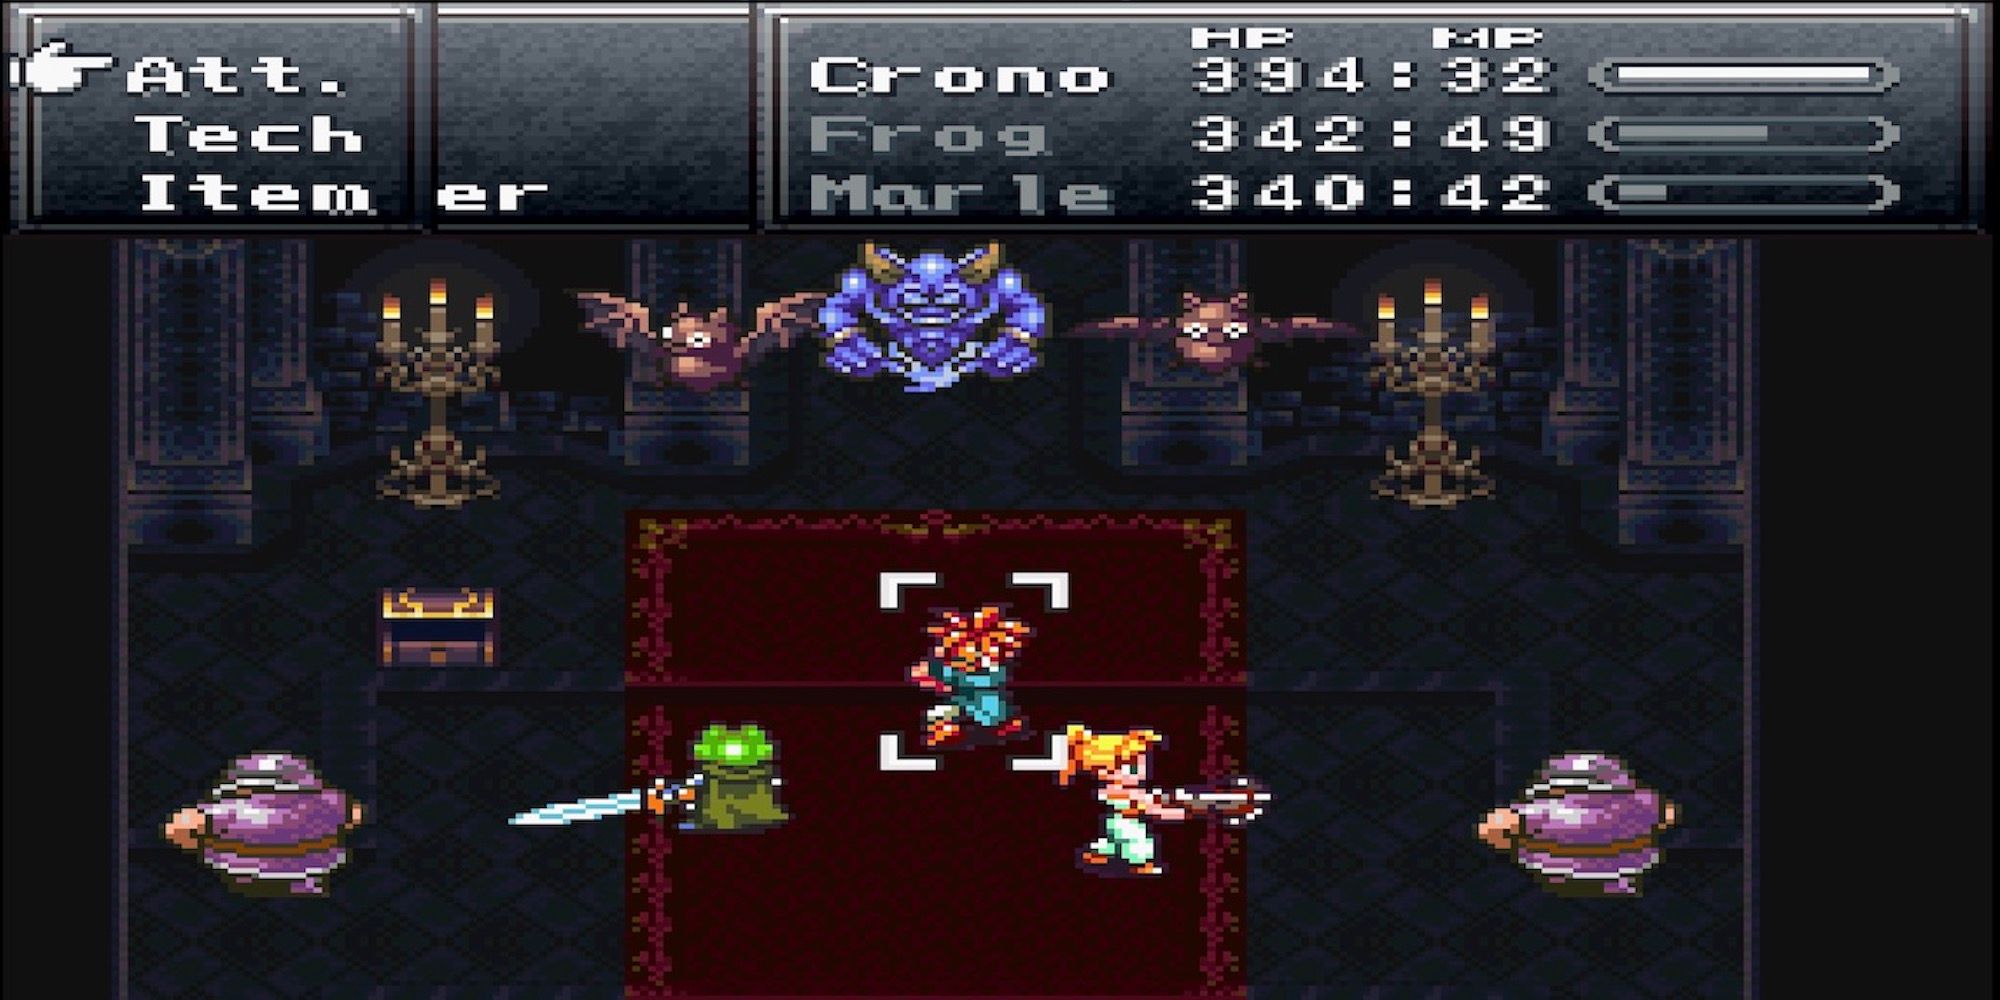 Fighting a battle in Chrono Trigger